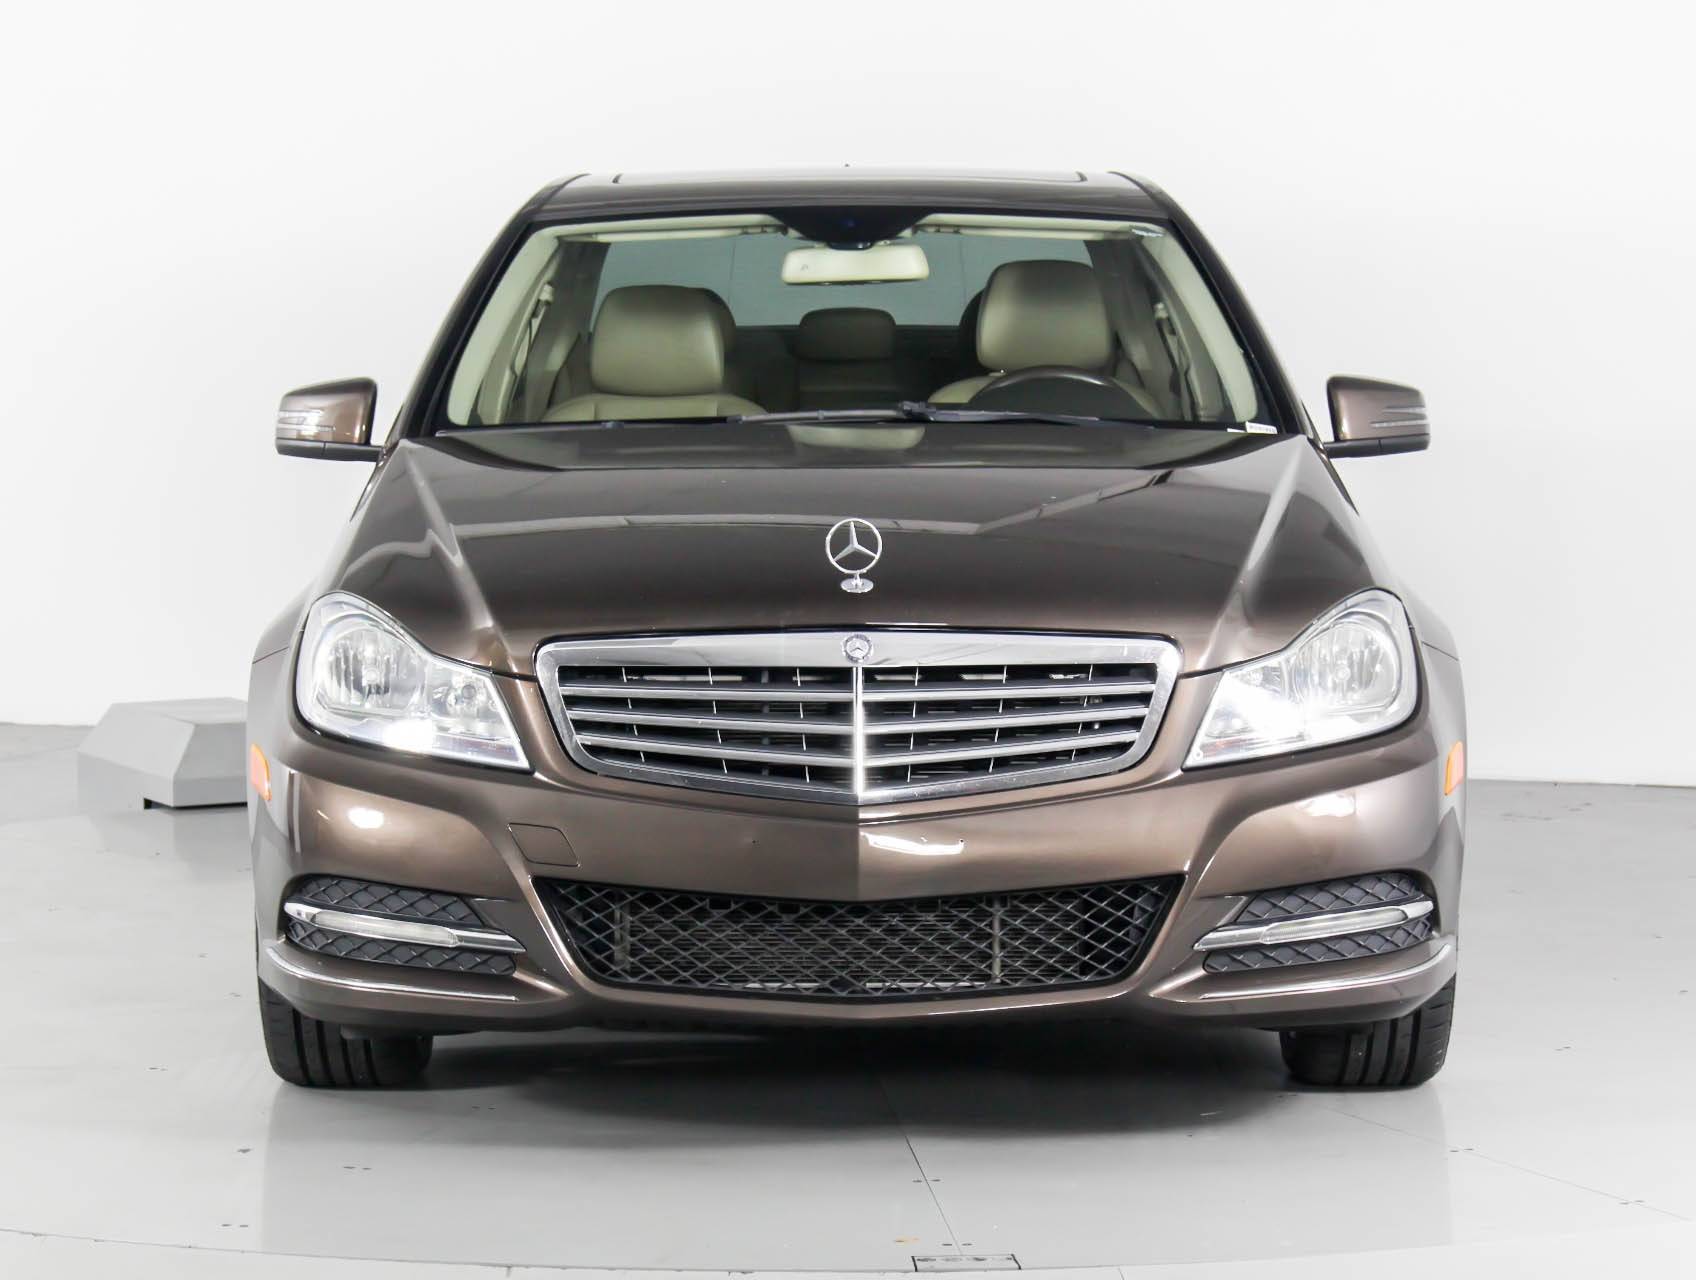 Florida Fine Cars - Used MERCEDES-BENZ C CLASS 2013 WEST PALM C300 4MATIC